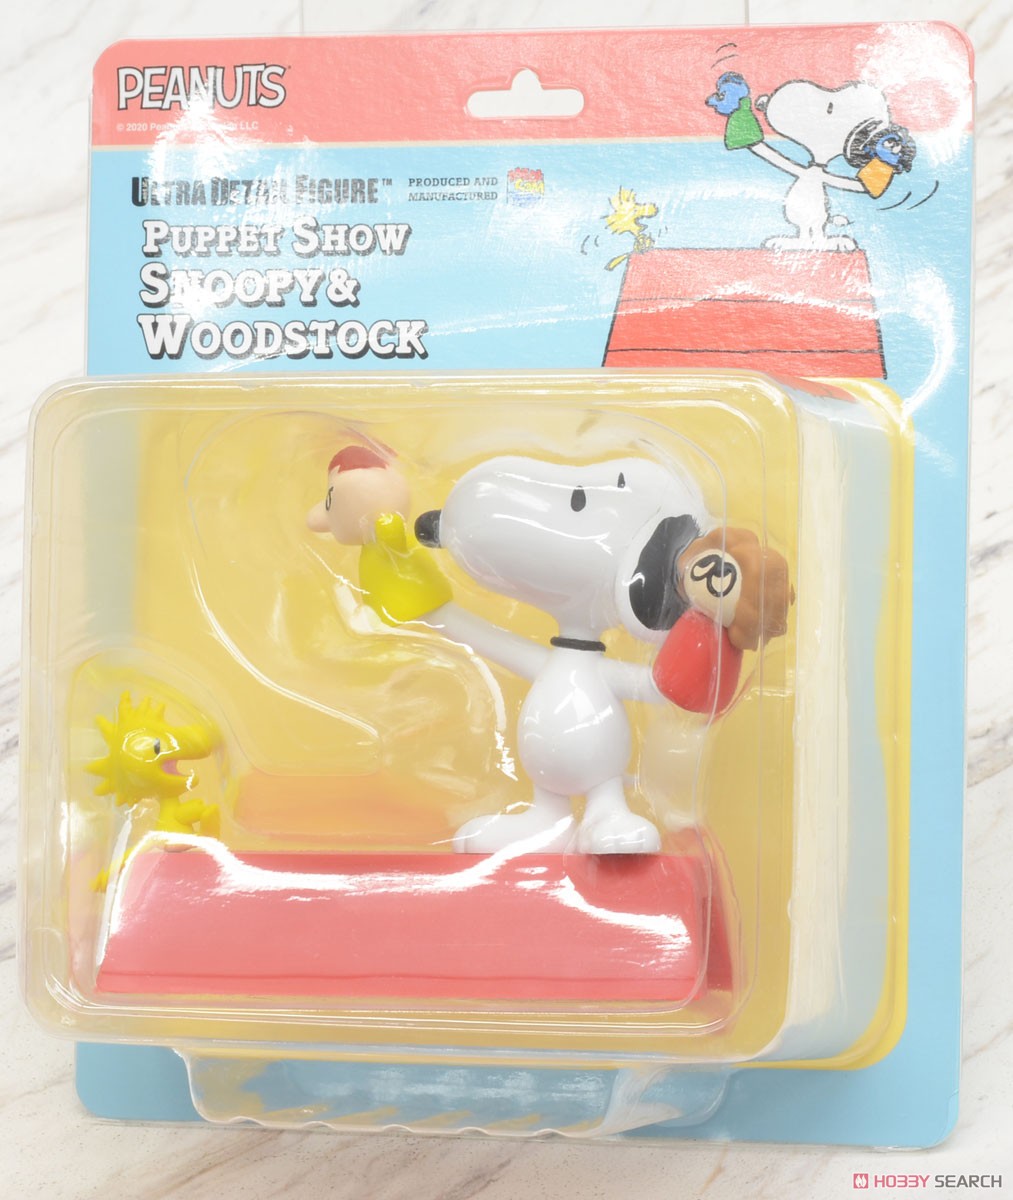 UDF No.546 Peanuts Series 11 Snoopy & Woodstock (Completed) Package1